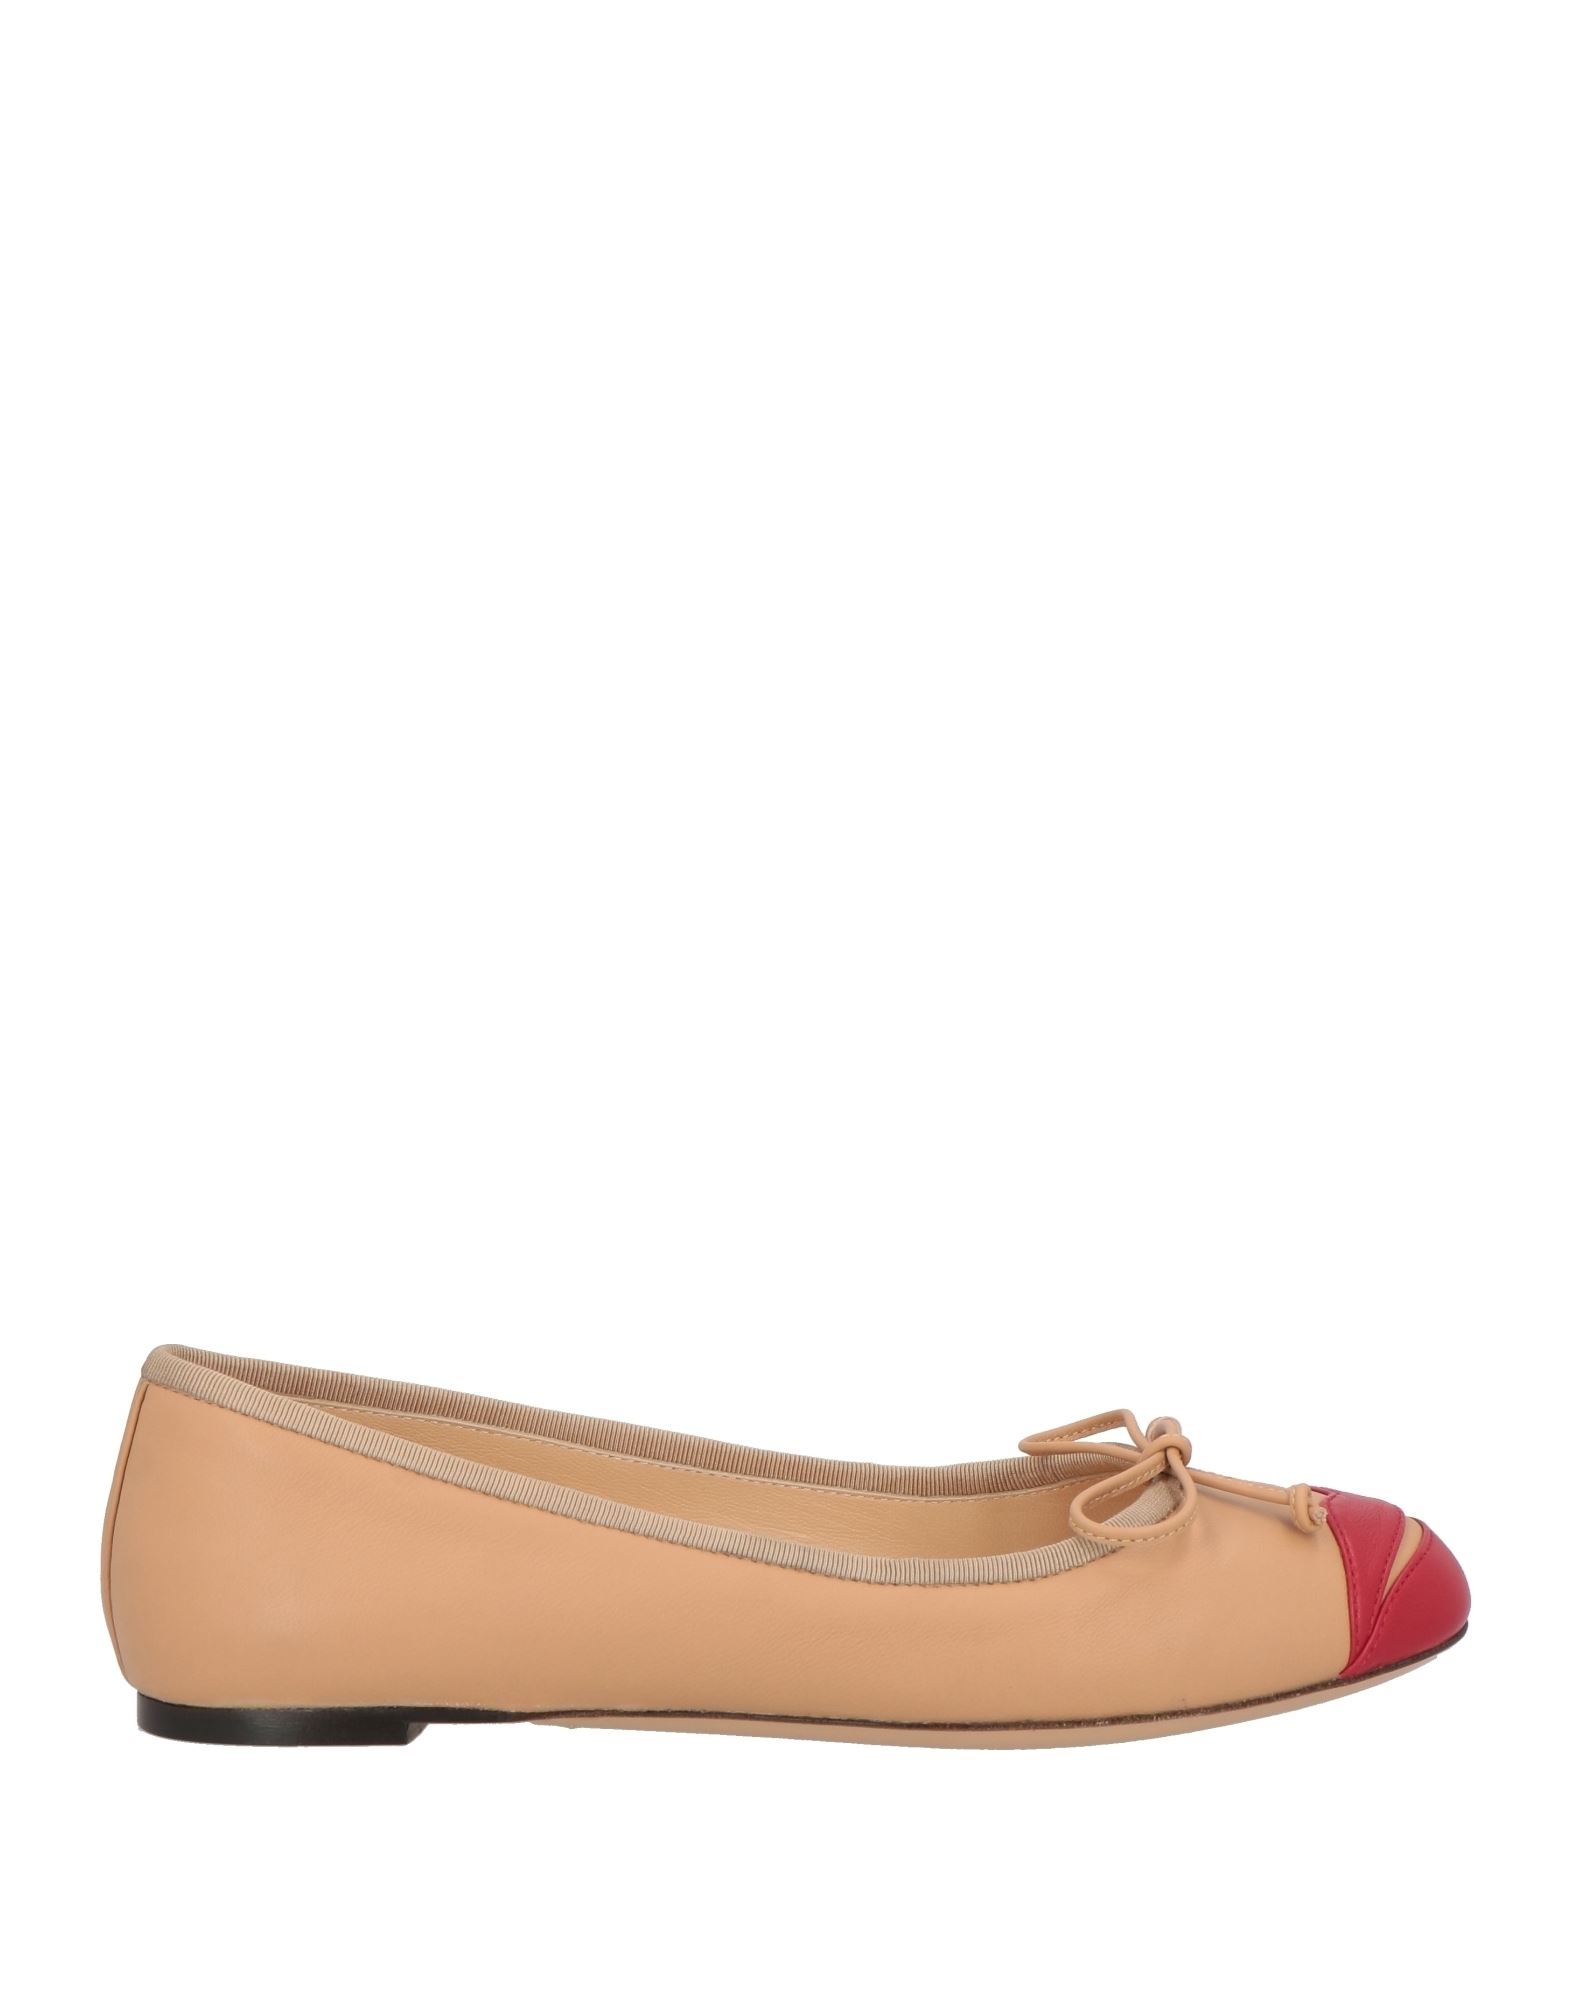 CHARLOTTE OLYMPIA CHARLOTTE OLYMPIA WOMAN BALLET FLATS BEIGE SIZE 6.5 LEATHER,11487143VT 5